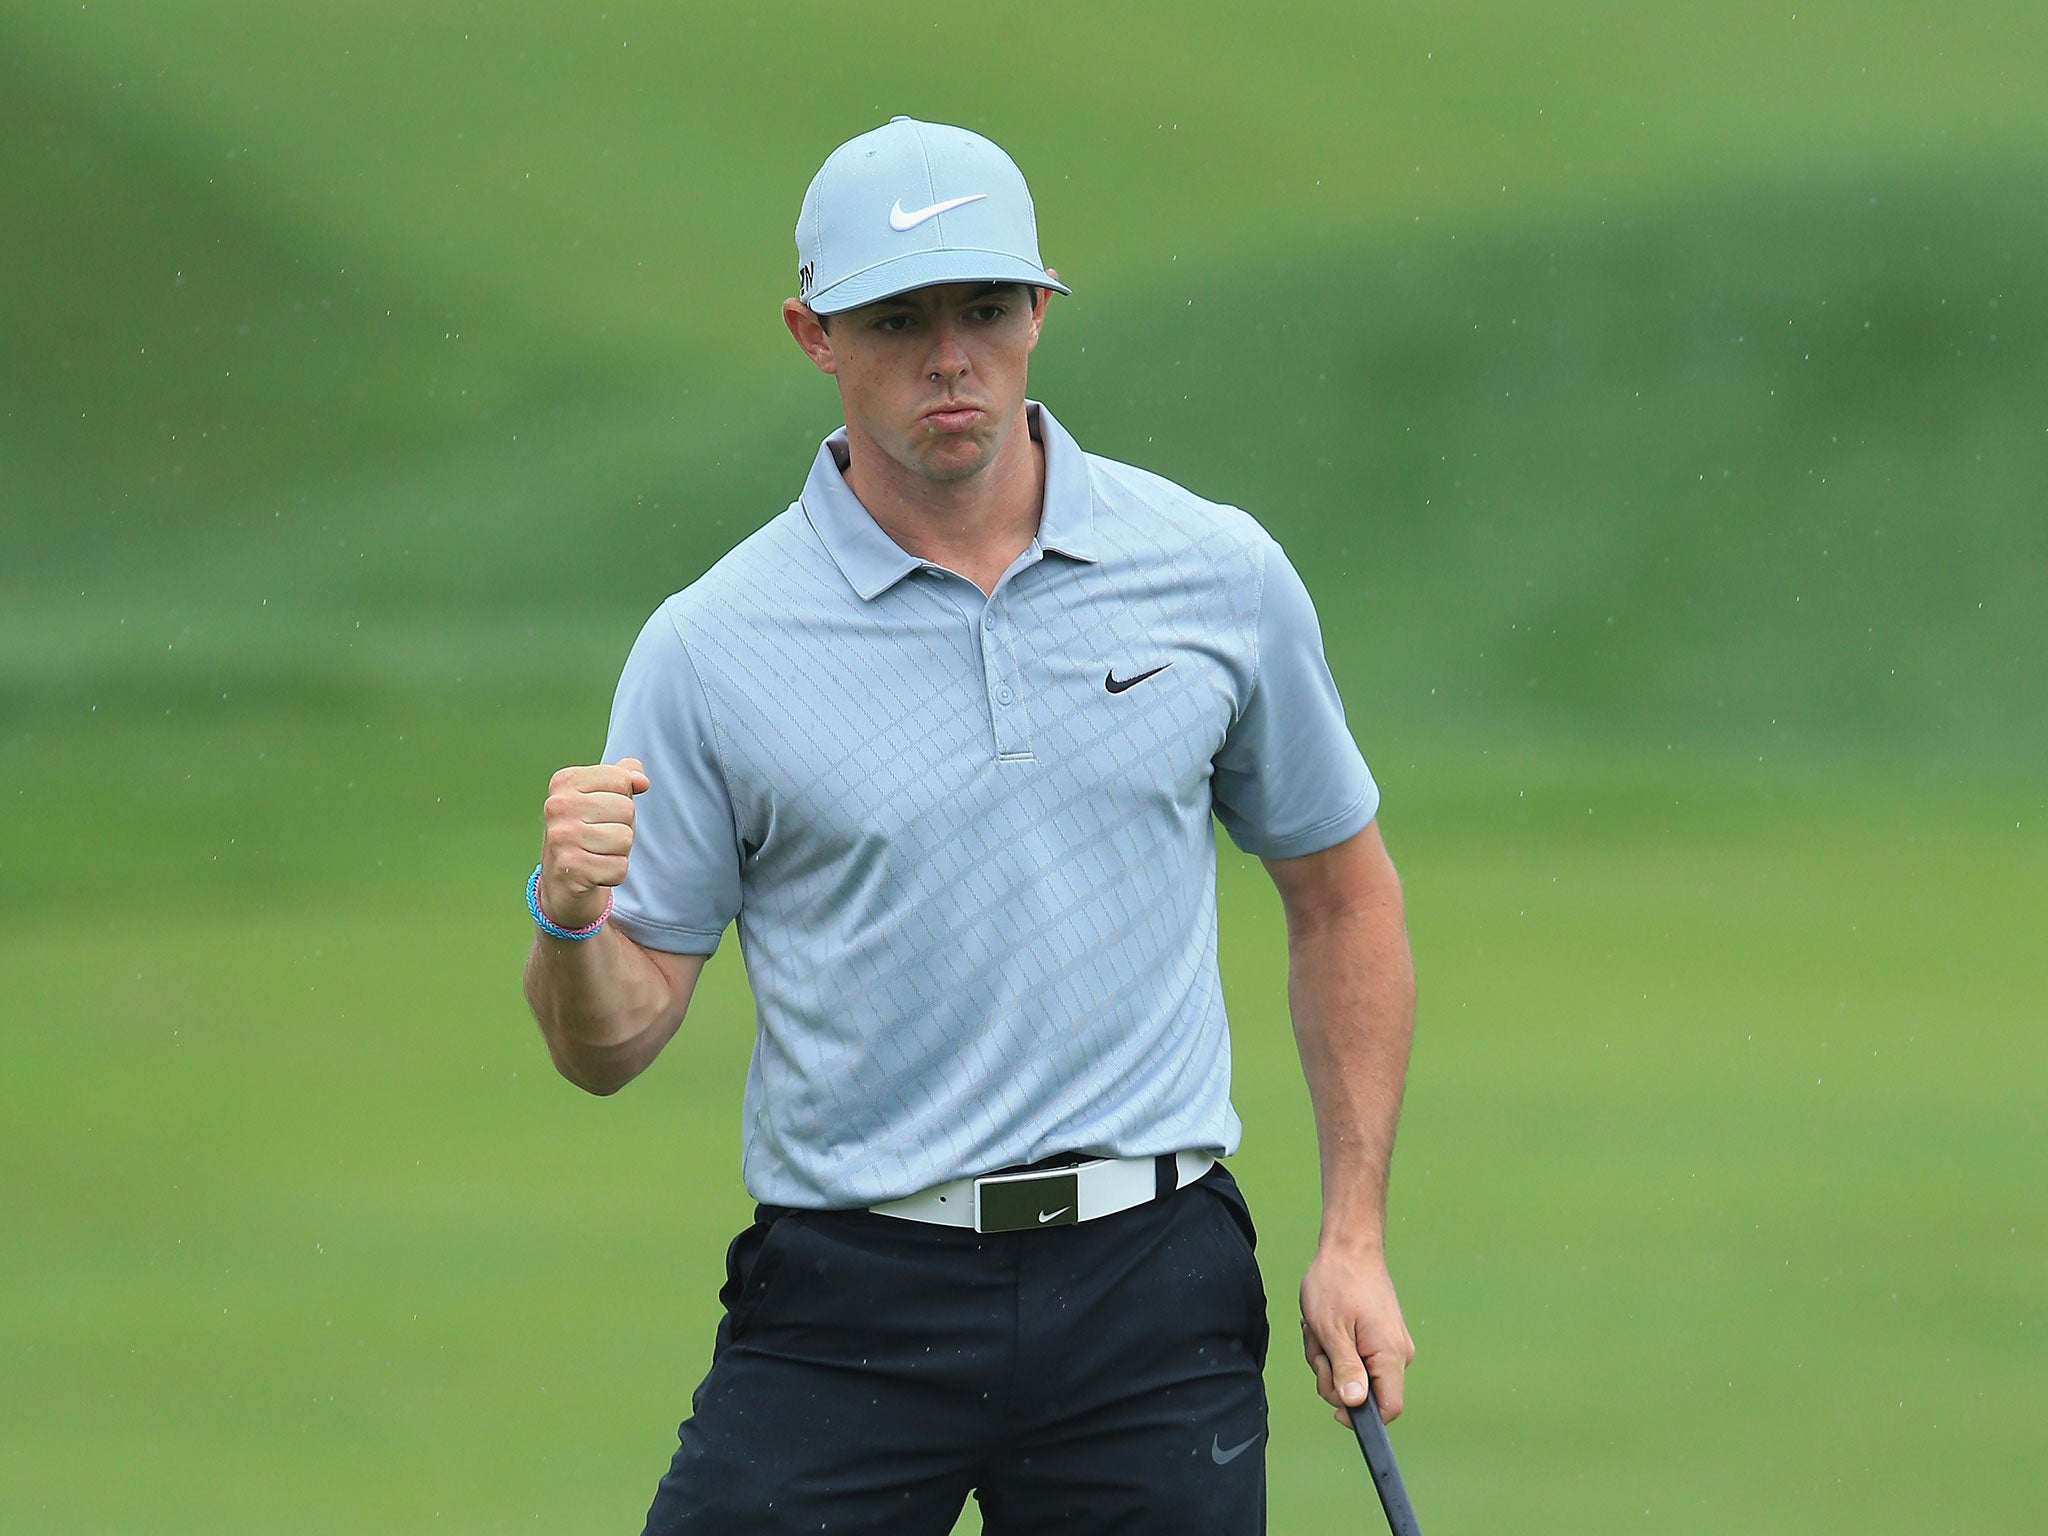 Rory McIlroy overcomes difficult conditions at Valhalla
to keep on track for more major success at the US PGA